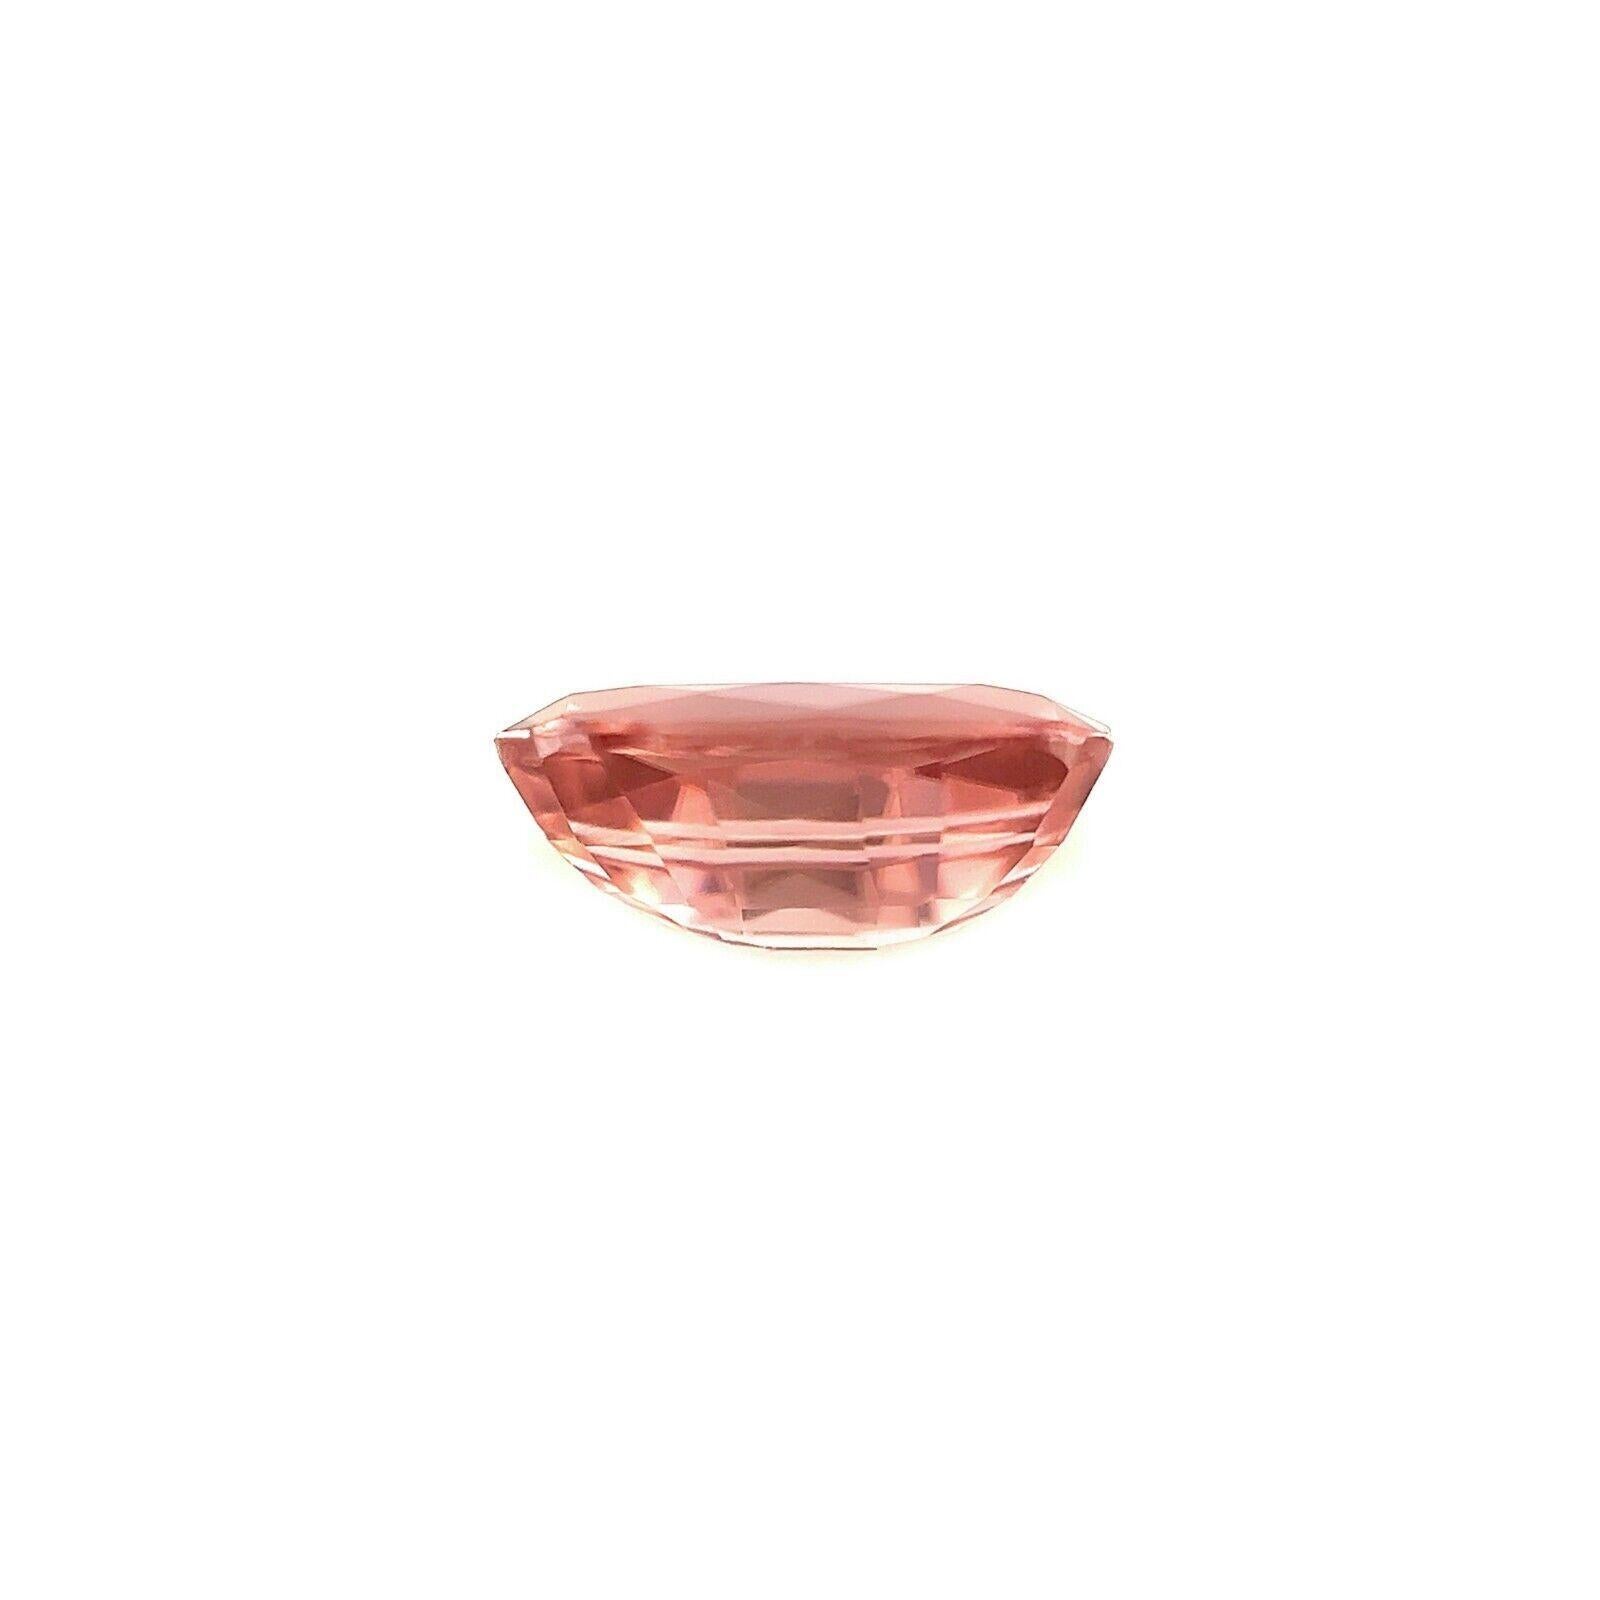 NATURAL 1.92ct Fine Pink Zircon Cushion Cut Loose Gemstone 8.8x5.2mm VVS In New Condition For Sale In Birmingham, GB